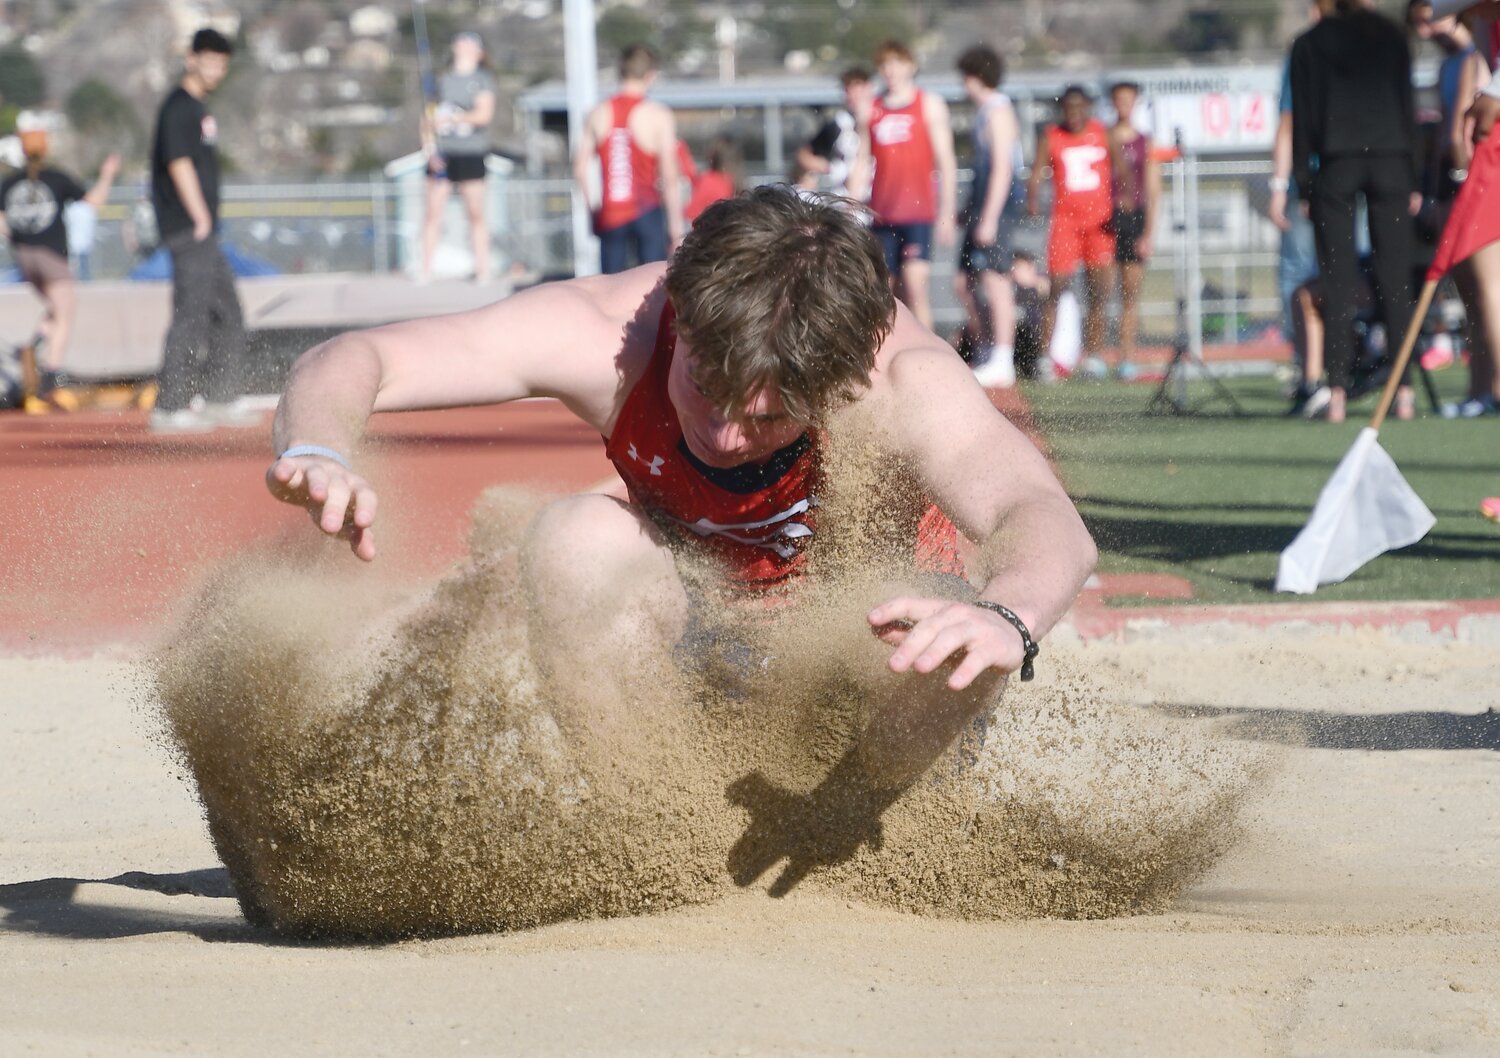 Red Devil athlete Brayden Wallace finished fourth in the long jump Thursday at the Farmington Super Meet in Utah, with a distance of 19 feet, 9 inches. Wallace also placed eighth in the pole vault, clearing a height of 11 feet, 4 inches.